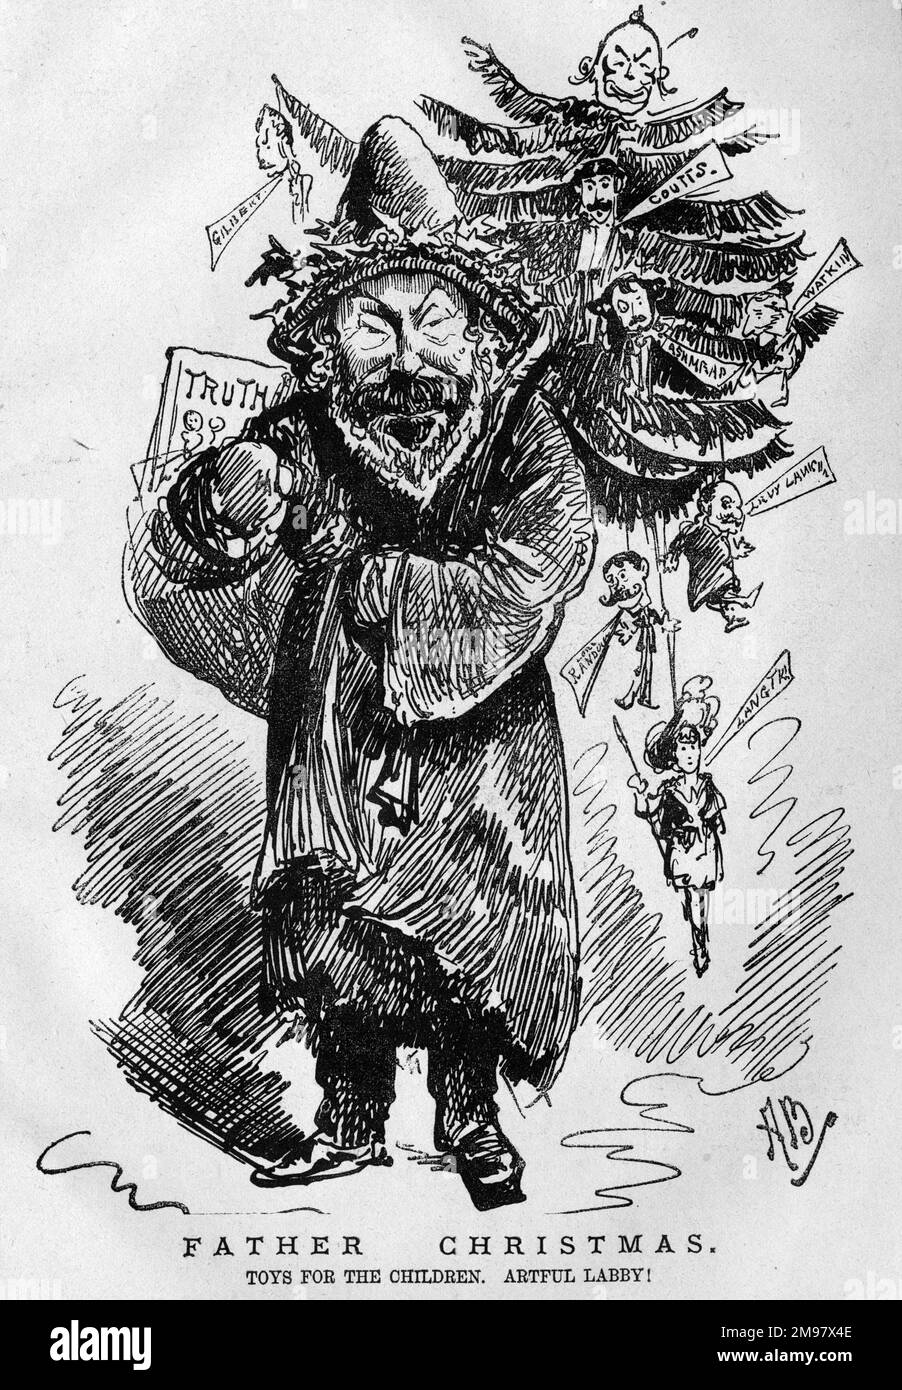 Cartoon of Henry Labouchere (1831-1912), Liberal MP, and owner-editor of the magazine Truth.  Seen here as Father Christmas.  Toys for the children. Artful Labby!  The dolls hanging from the tree include Charles Bradlaugh, Lillie Langtry, Levy Lawson, Lord Randolph Churchill, W S Gilbert, Ashmead, Watkin and Coutts. Stock Photo